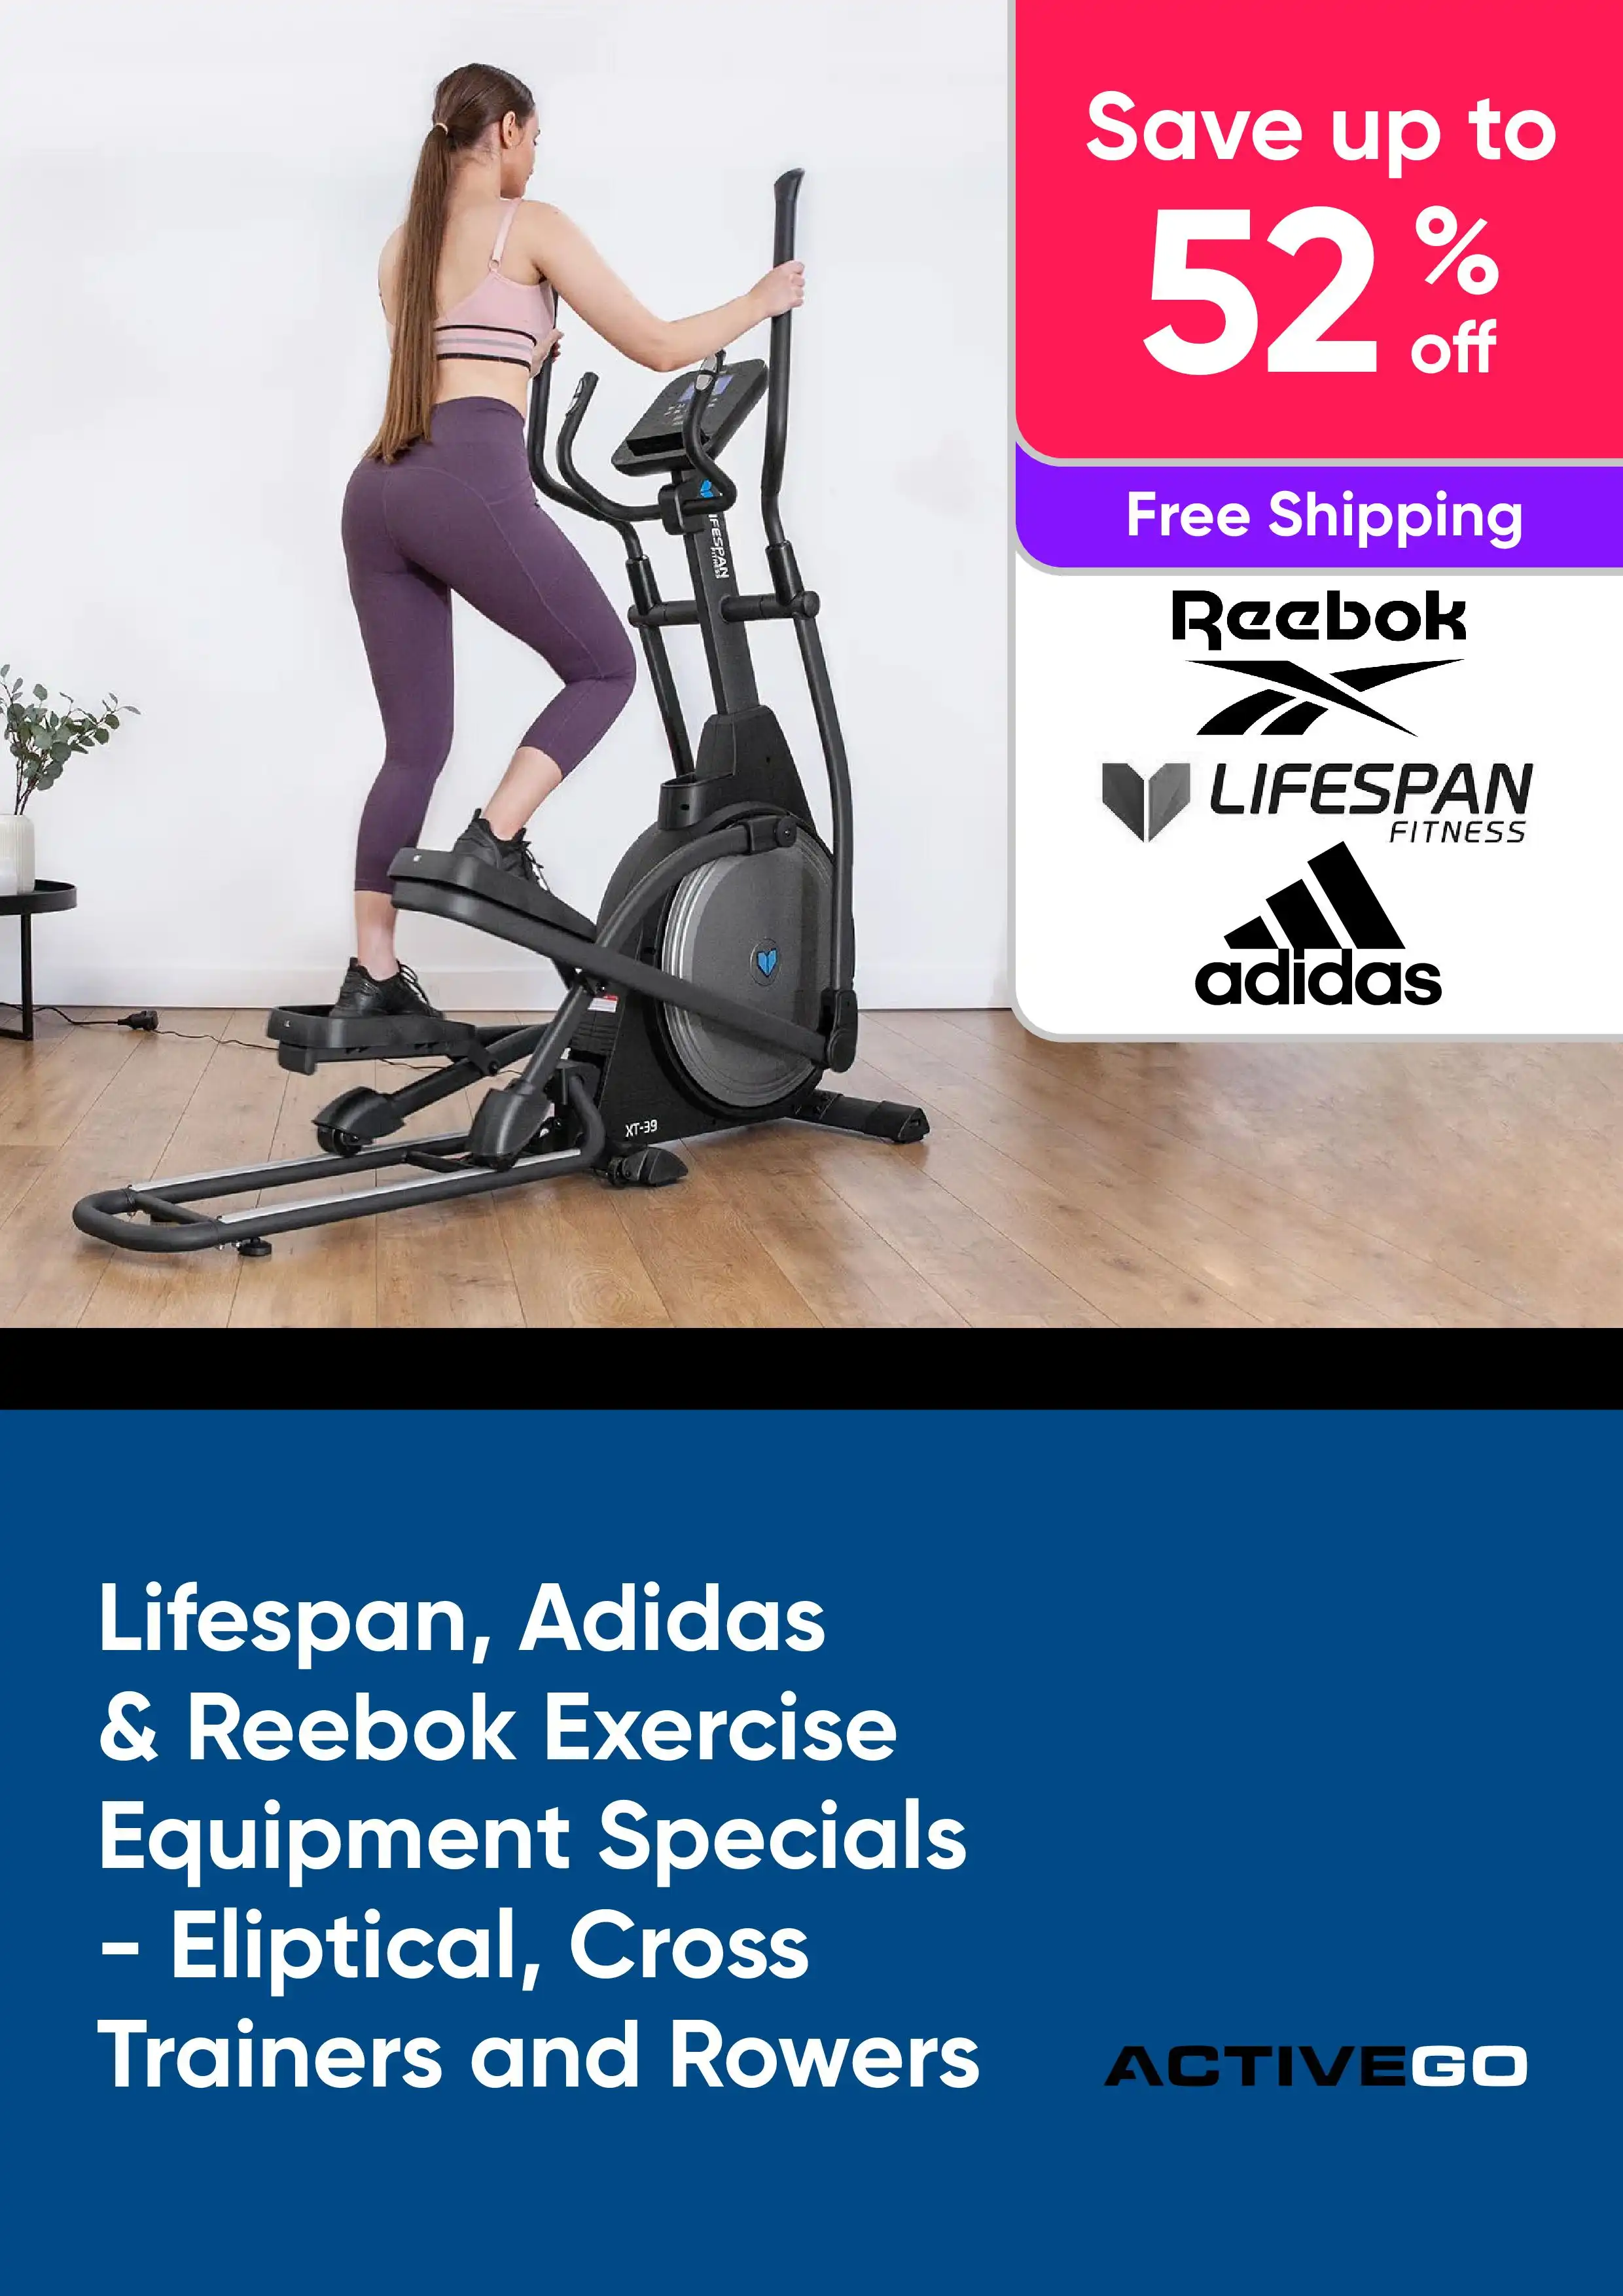 Lifespan, Adidas and Reebok Exercise Equipment Specials - Eliptical, Cross Trainers and Rowers